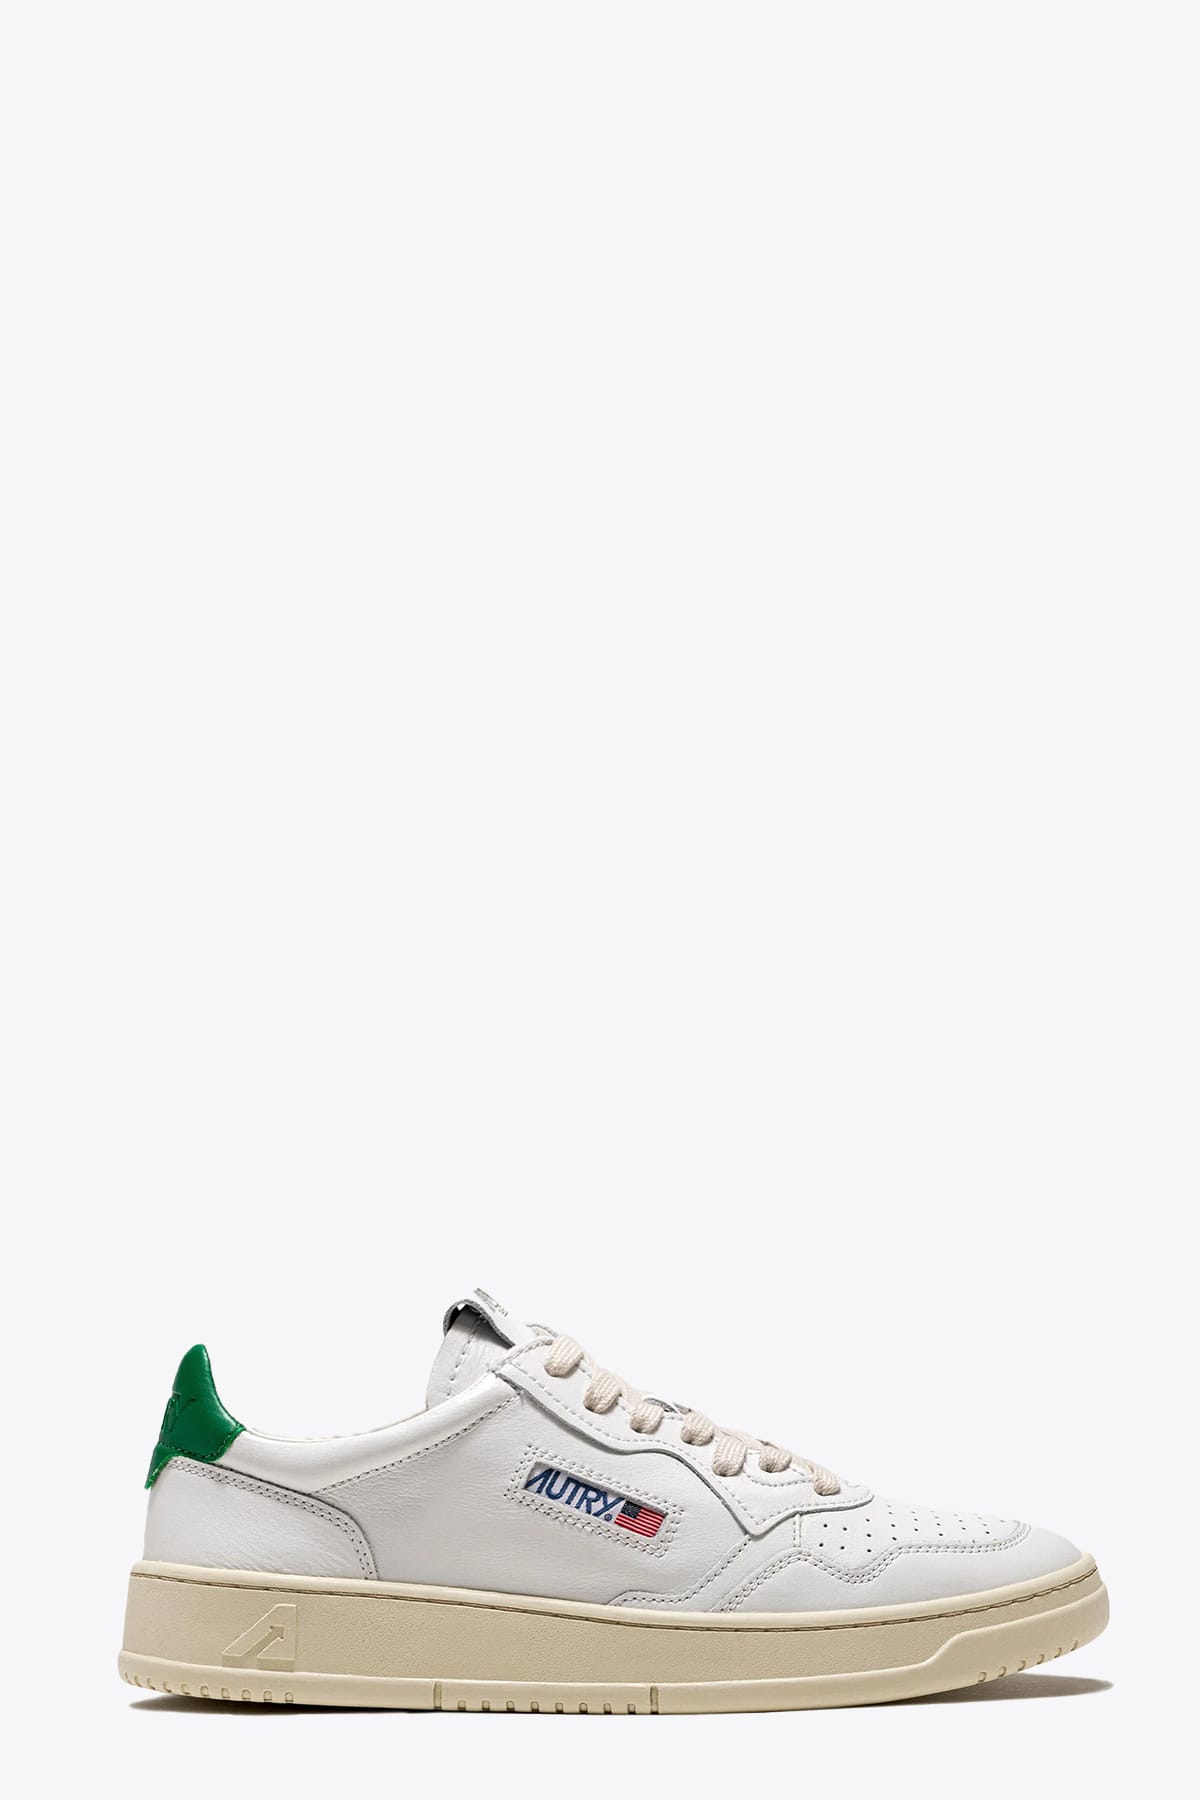 Autry 01 Low Man Leat/leat White leather sneakers with green tab - Medalist low